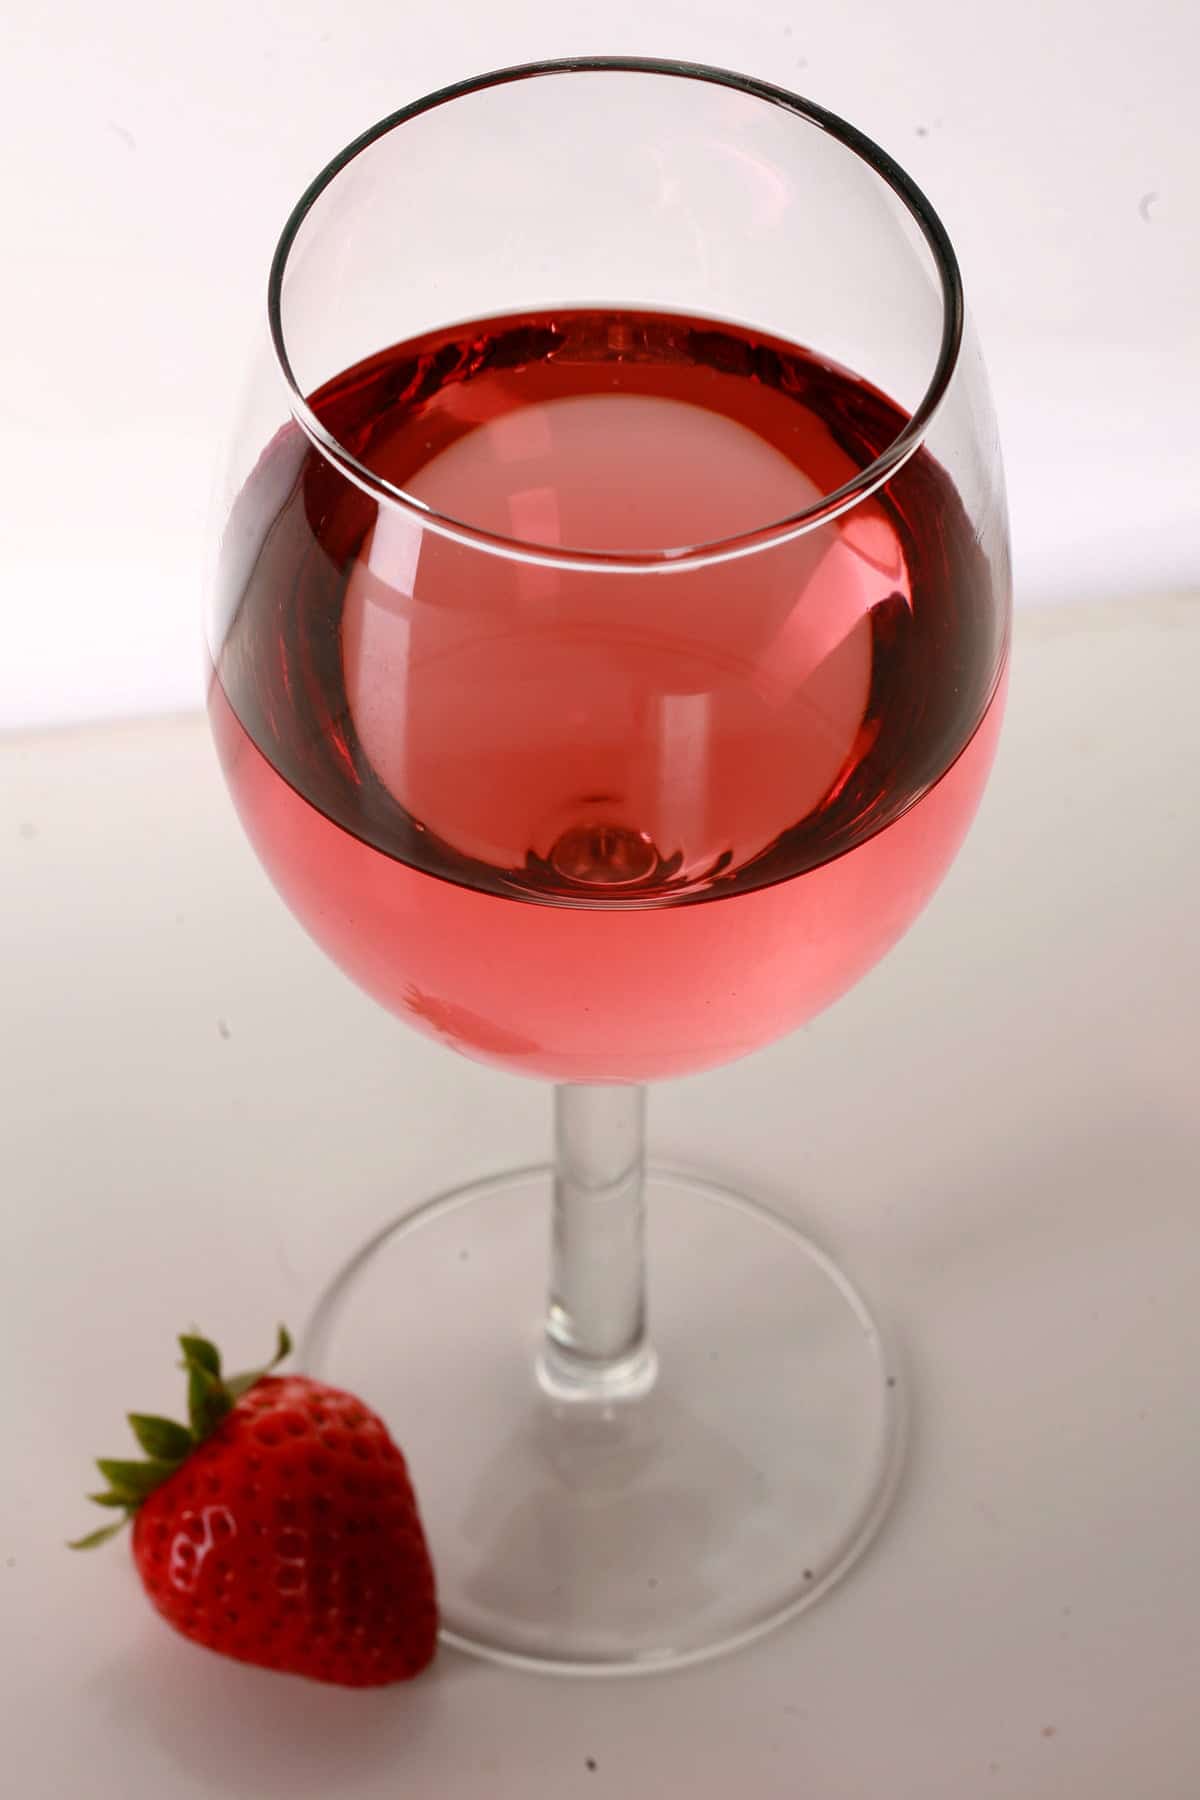 A glass of pale red strawberry wine with a single strawberry at the base of the glass.